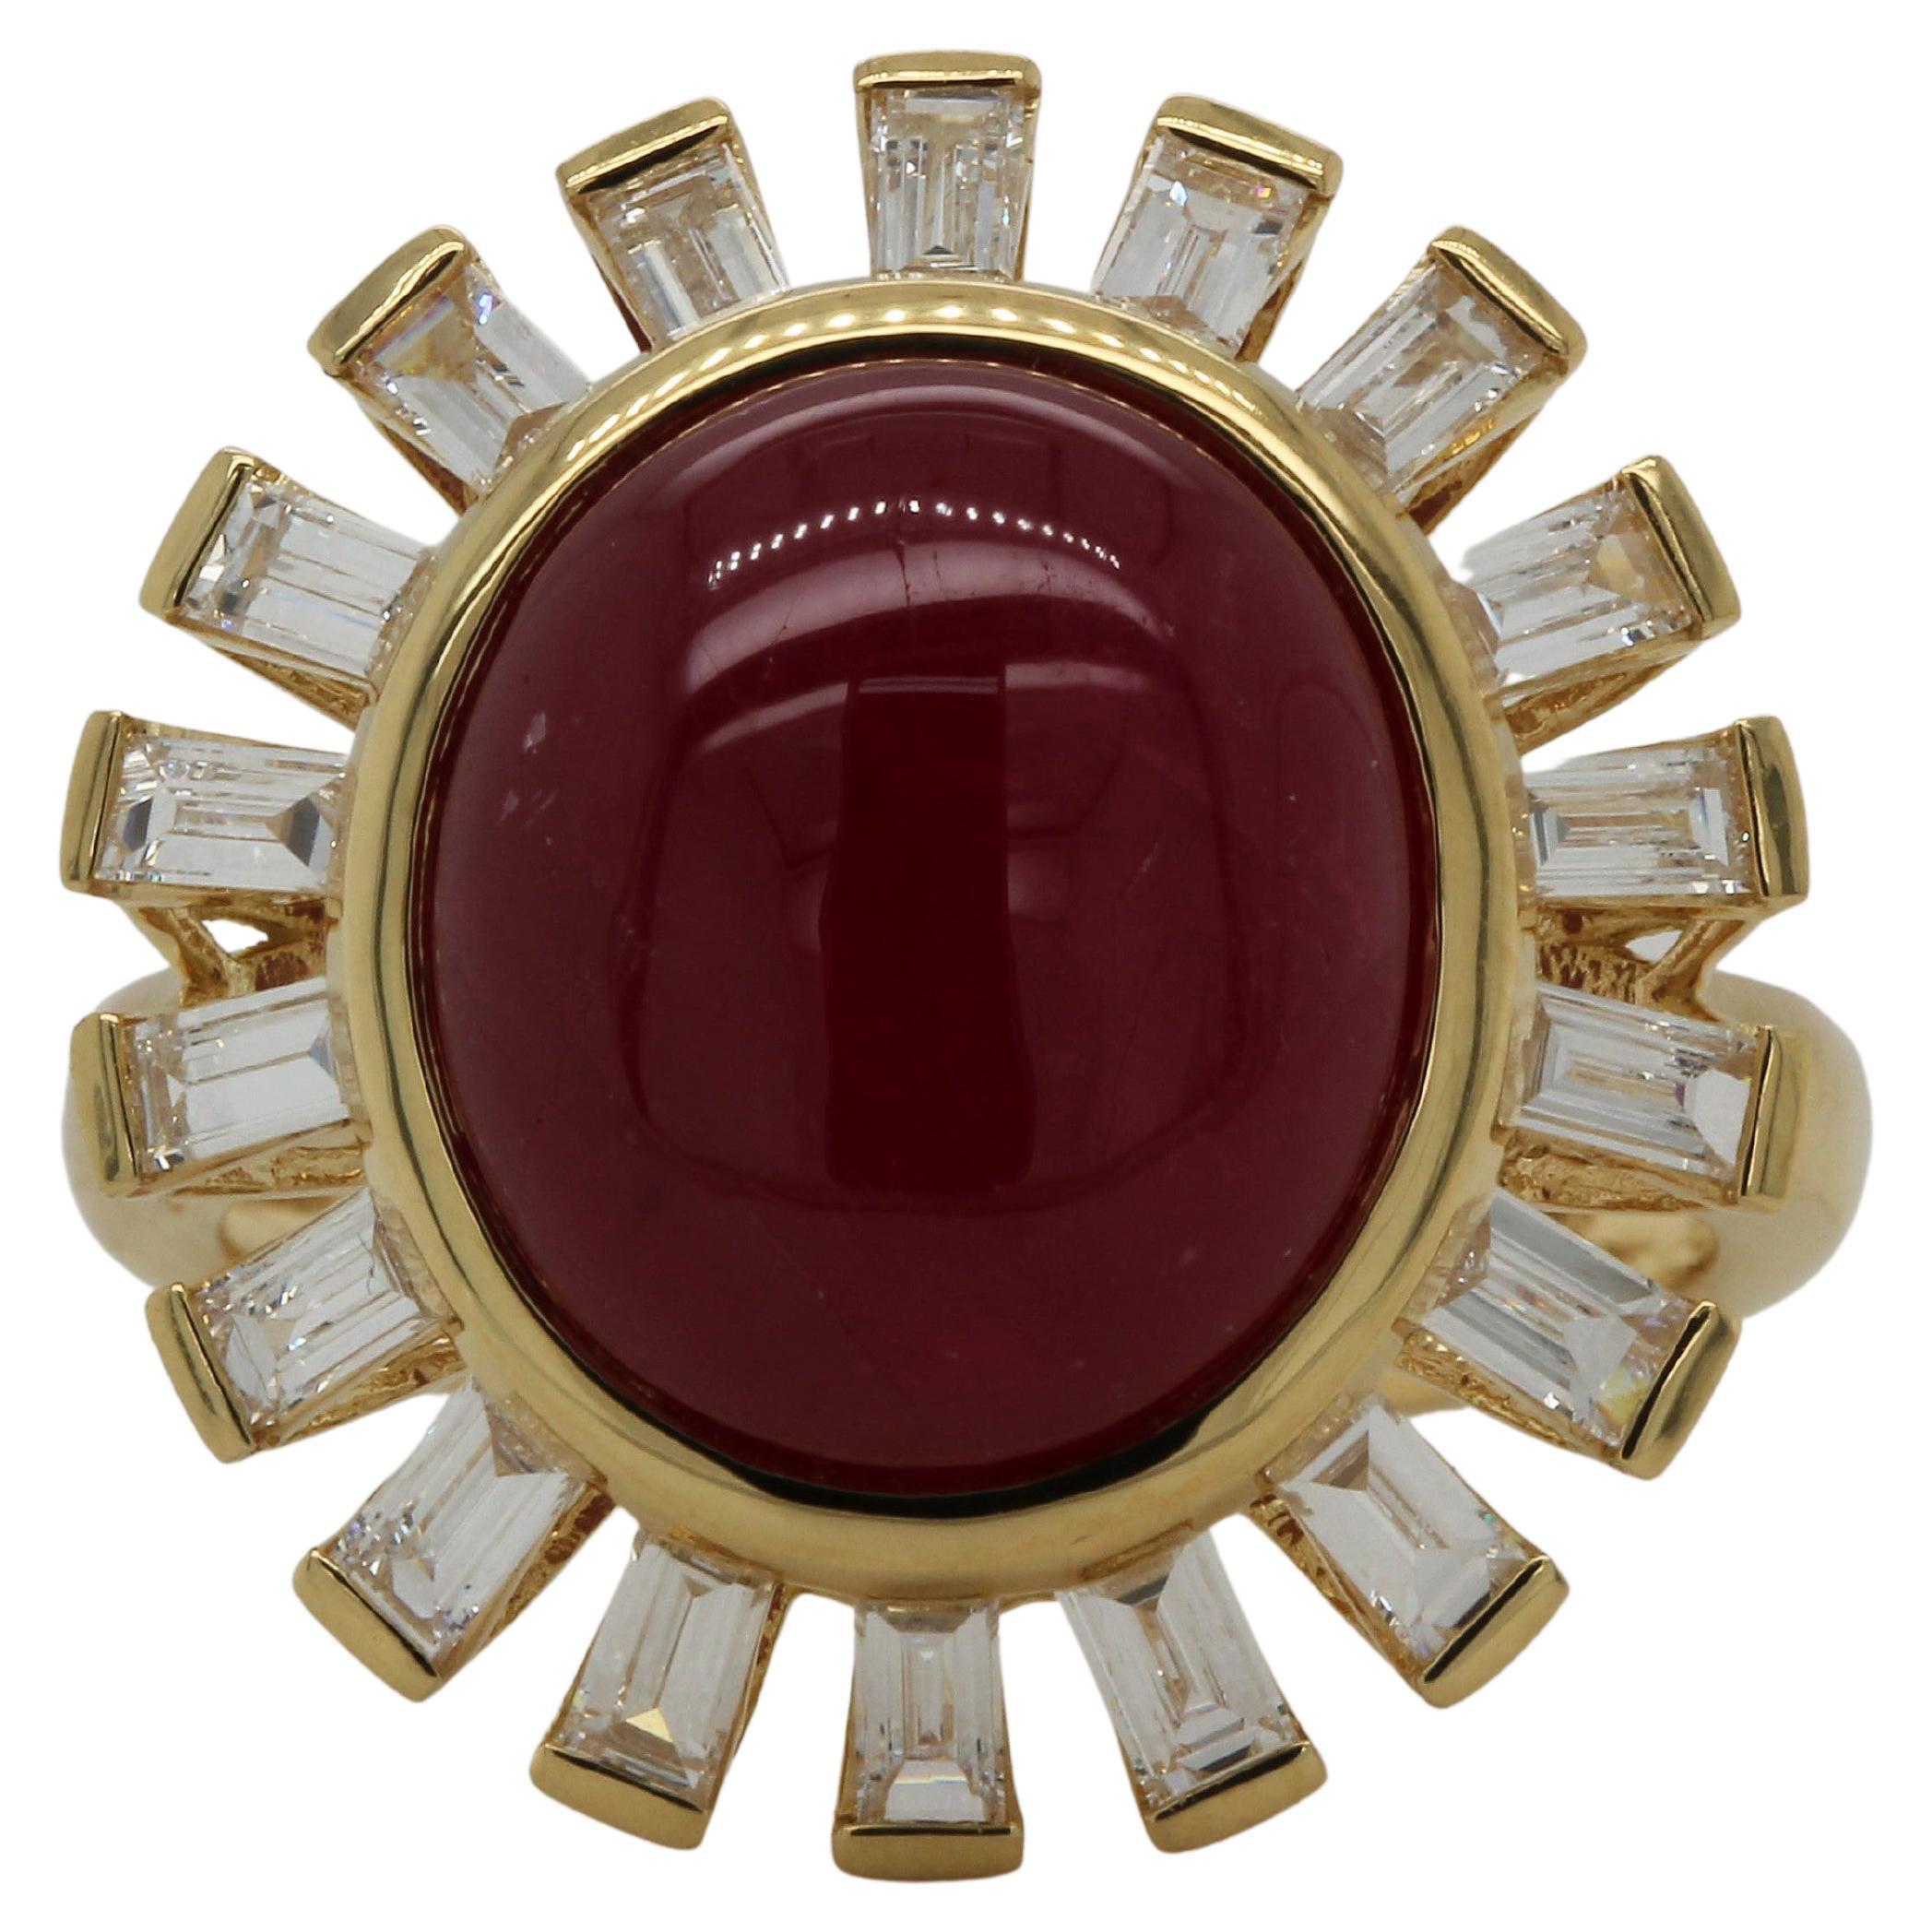 A remarkable showcase of preciousness and elegance, our stunning 10.21 carat ruby cabochon ring is set with 0.86 carats of white tapper diamonds. A perfect combination of elegance and strength, this jewelry is made to combine the beauty of one of